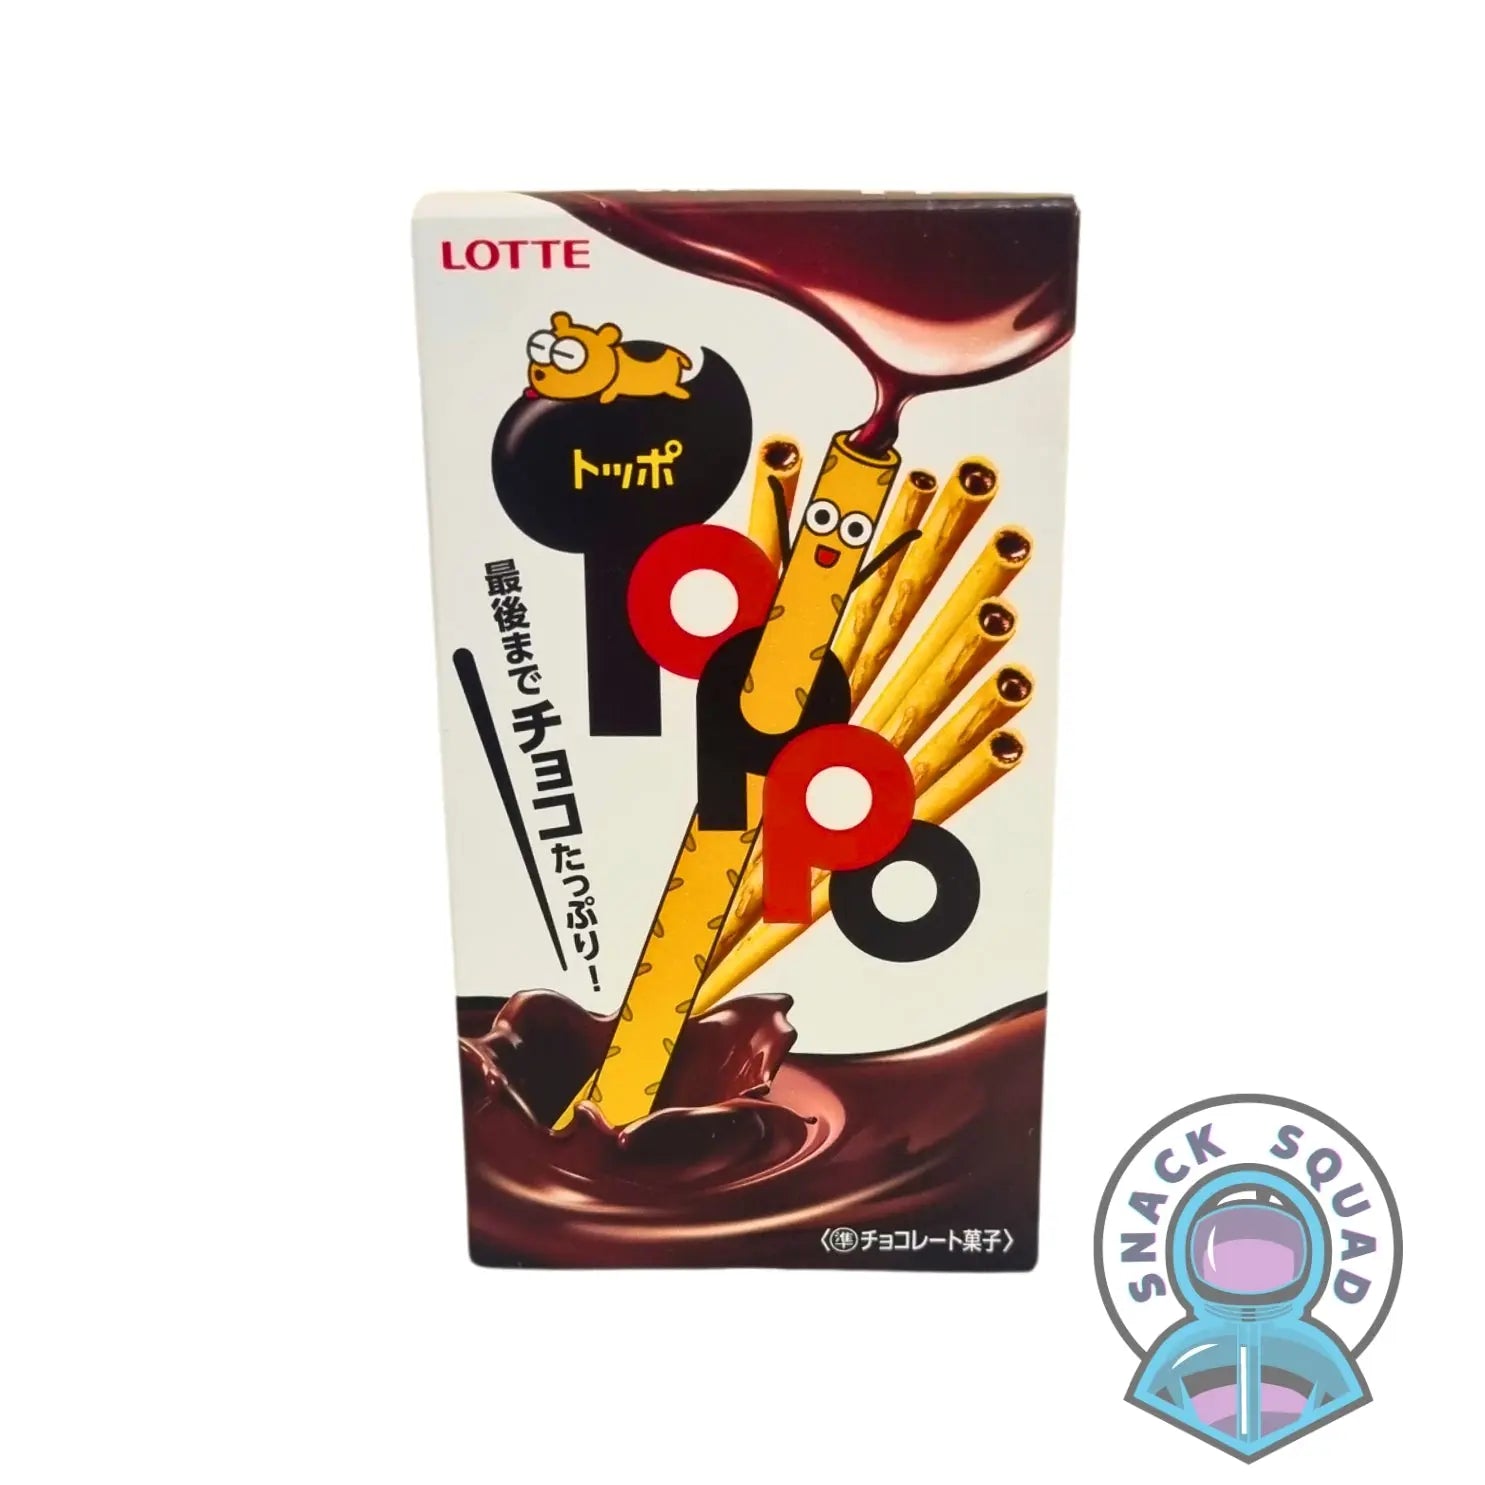 Lotte Toppo Chocolate 72g (Japan) Snack Squad